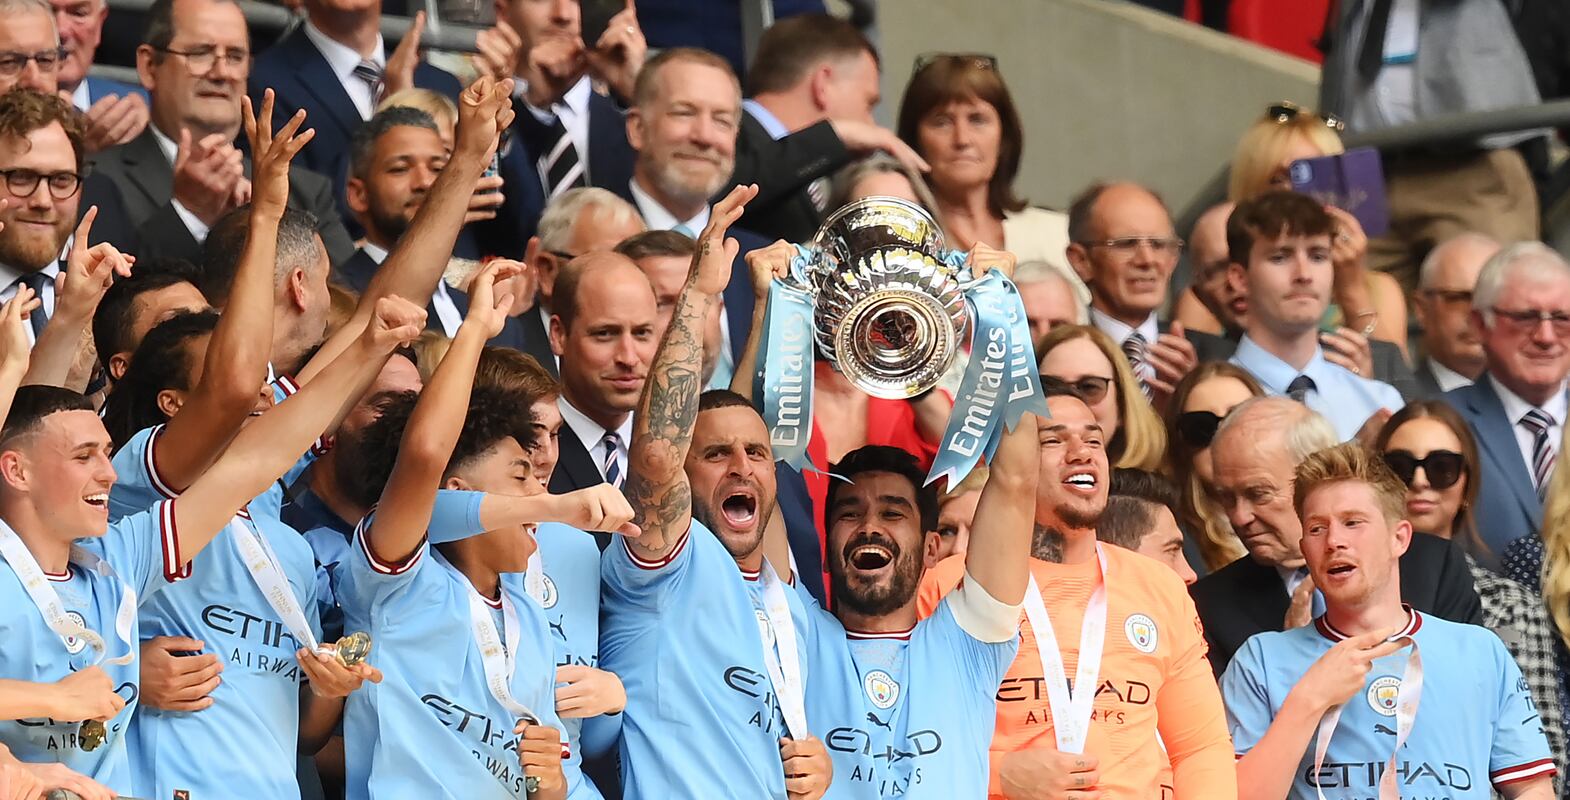 LONDON, ENGLAND - JUNE 03: Ilkay Guendogan of Manchester City lifts the Emirates FA Cup trophy after the team's victory in the Emirates FA Cup Final between Manchester City and Manchester United at Wembley Stadium on June 03, 2023 in London, England. (Photo by Shaun Botterill / Getty Images)